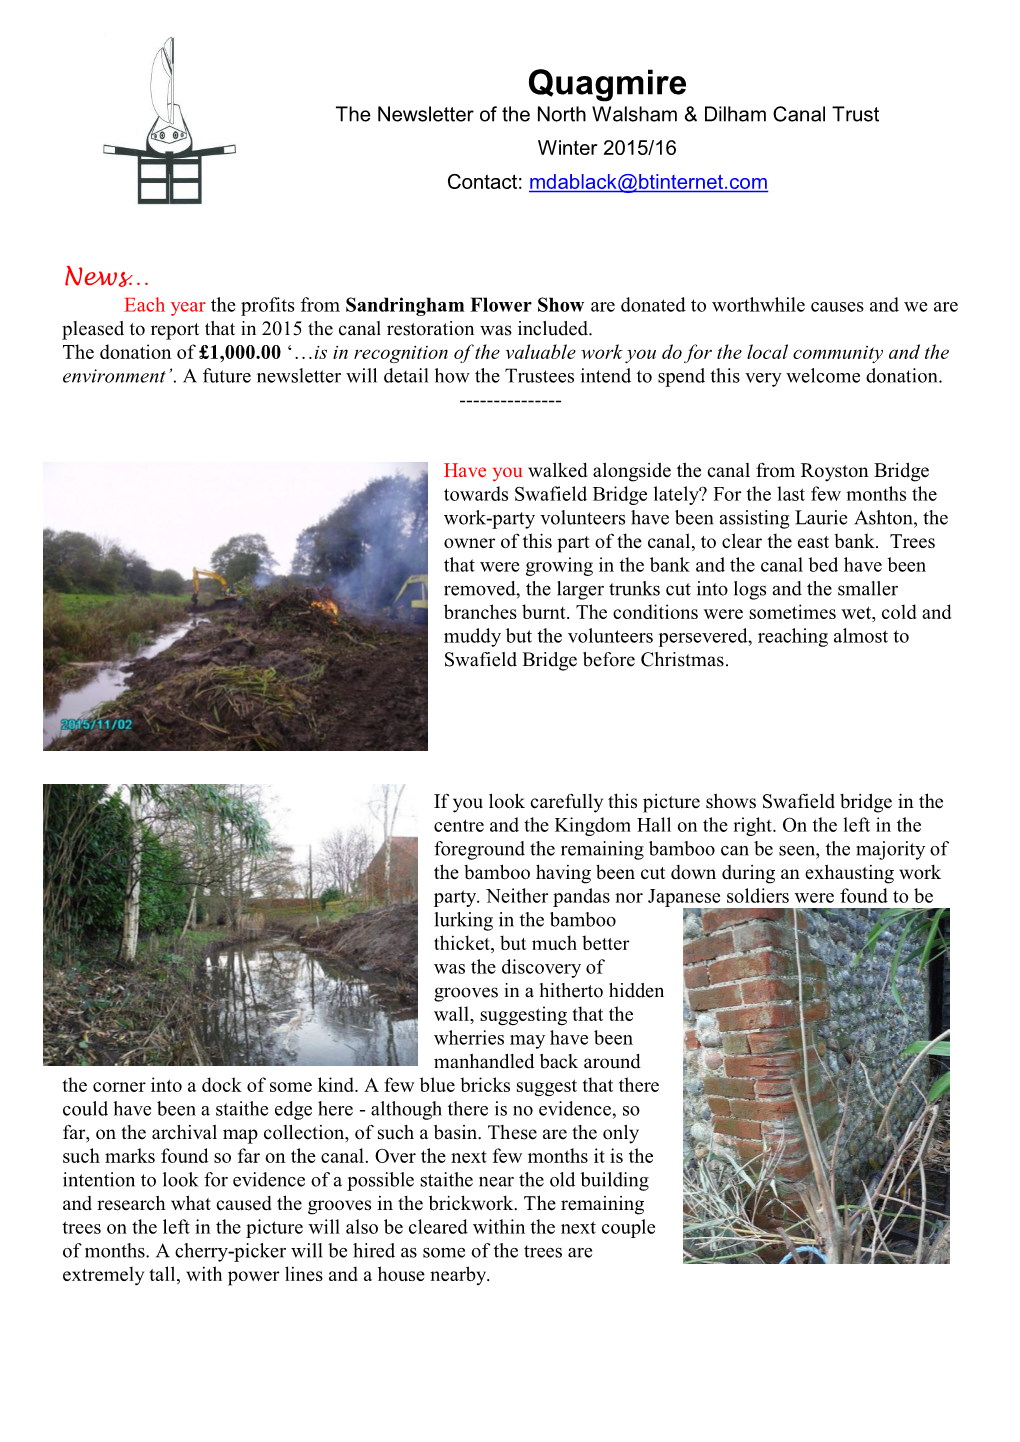 Quagmire the Newsletter of the North Walsham & Dilham Canal Trust Winter 2015/16 Contact: Mdablack@Btinternet.Com